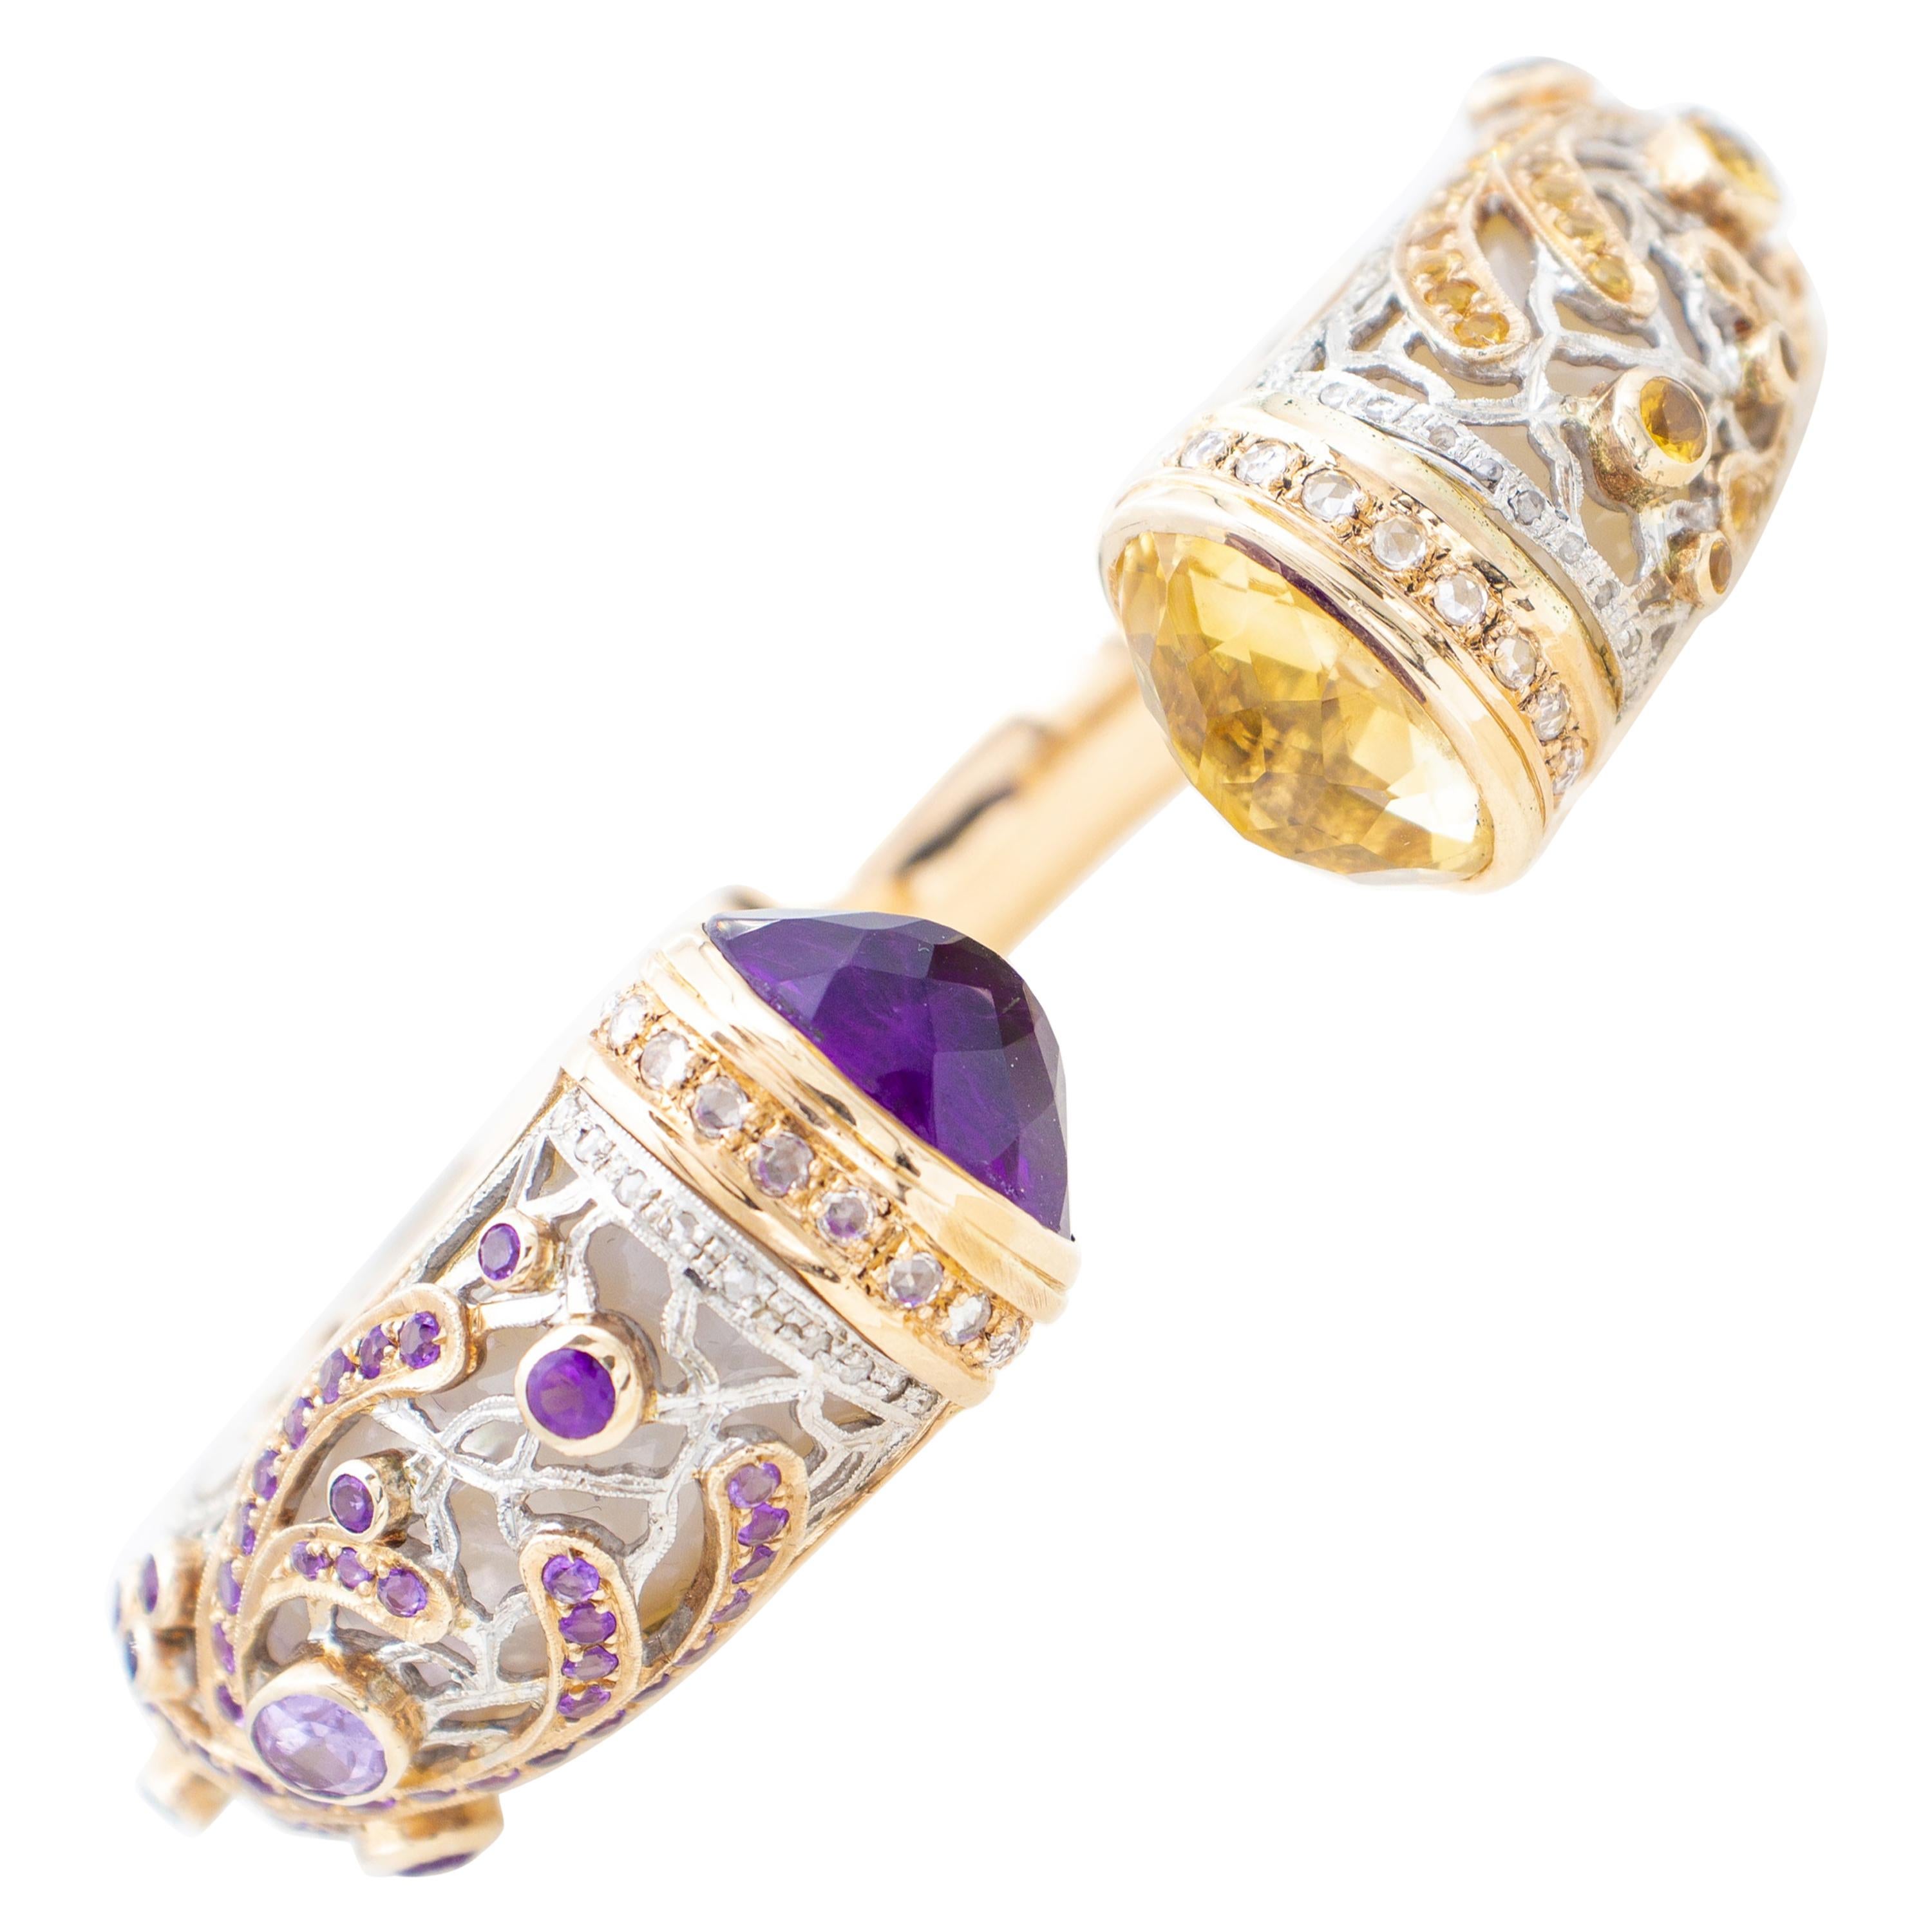 Diamonds Sapphires Amethysts Topazs White Stone 9kt Gold and Silver Bracelet For Sale